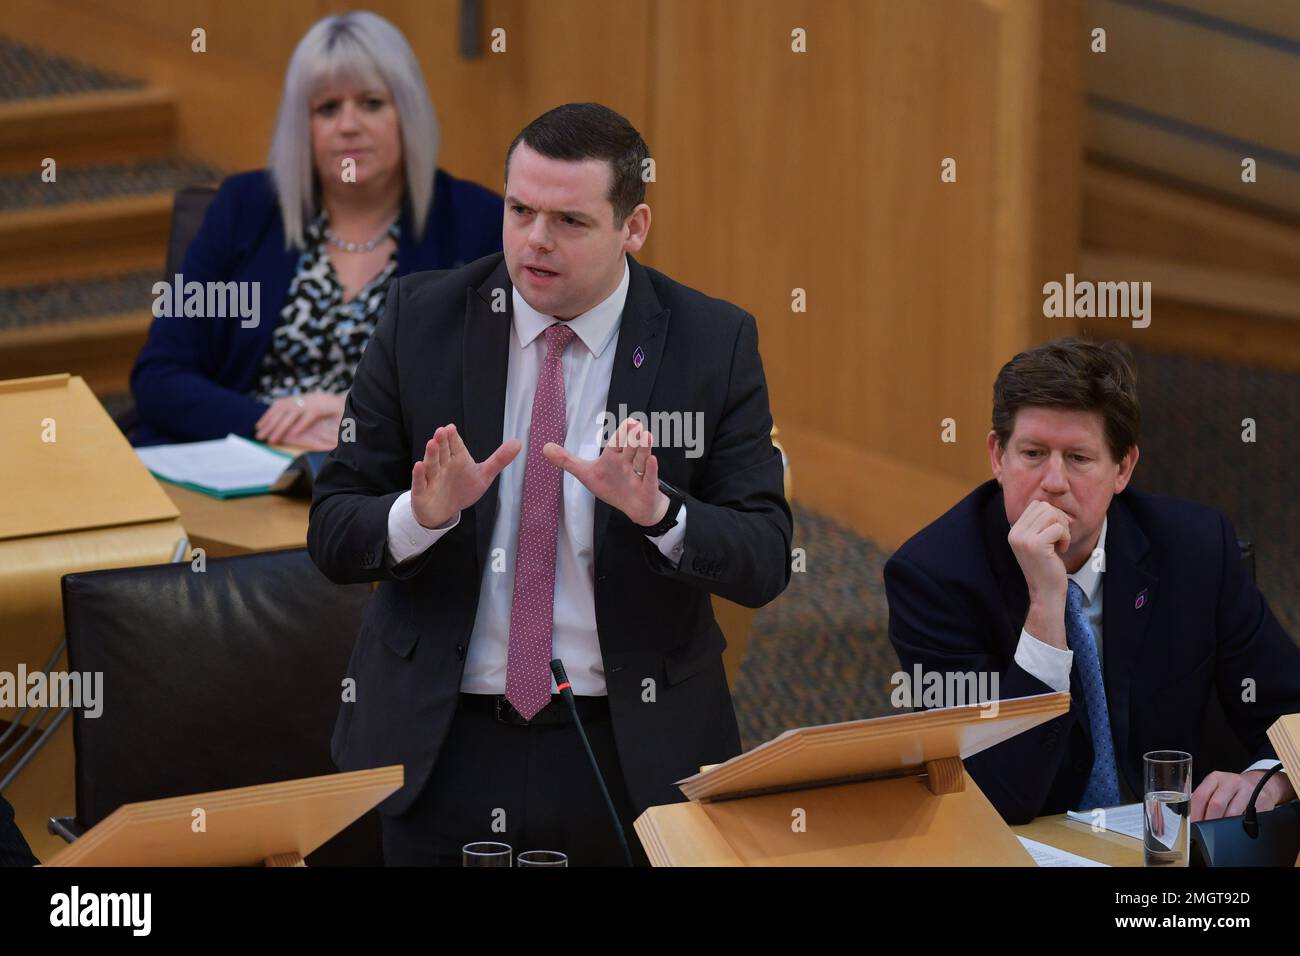 Edinburgh Scotland, UK 26 January 2023. Scottish Conservative leader Douglas Ross at First Minister Questions at the Scottish Parliament. credit sst/alamy live news Stock Photo